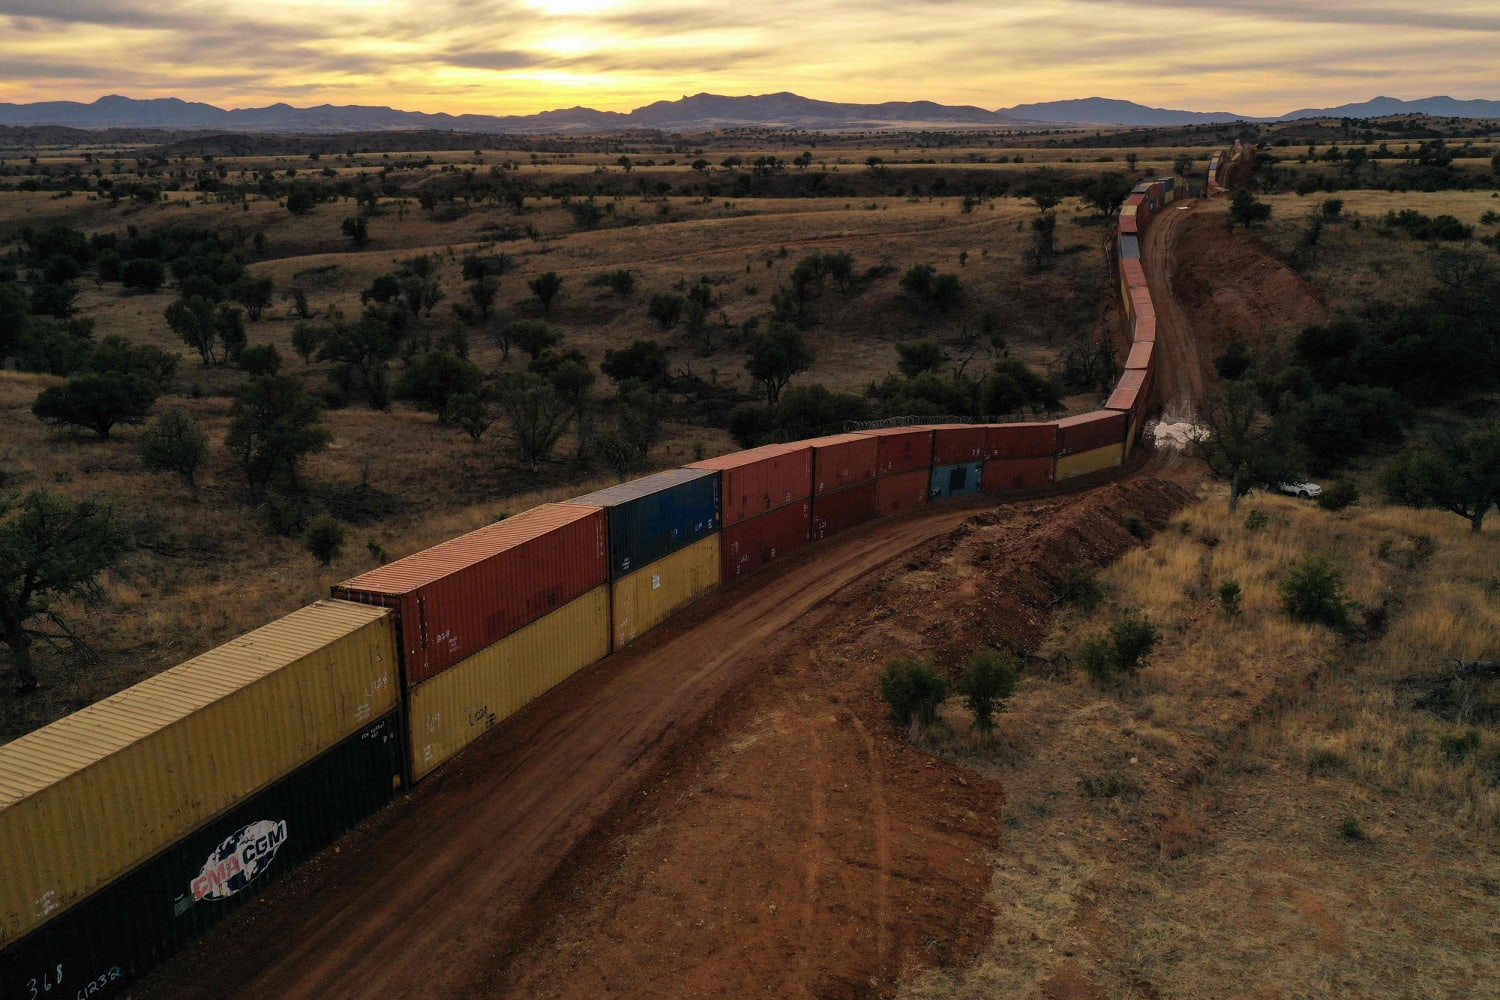 Arizona agrees to dismantle shipping container border wall